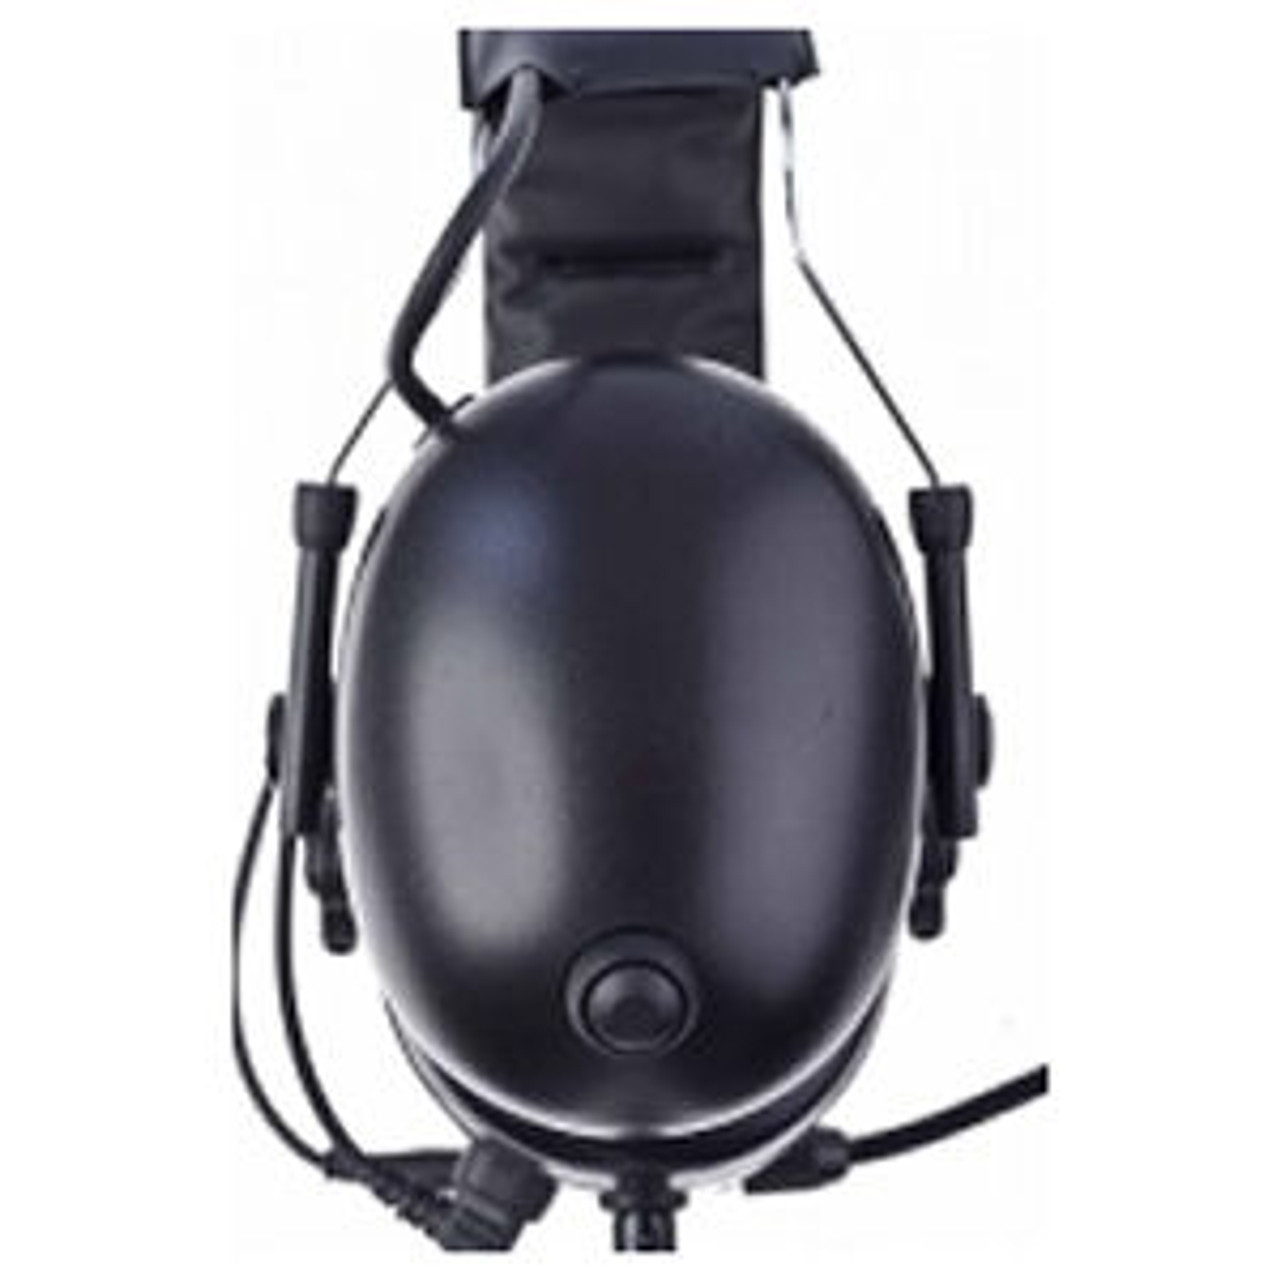 HYT / Hytera X1p Over The Head Double Muff Headset